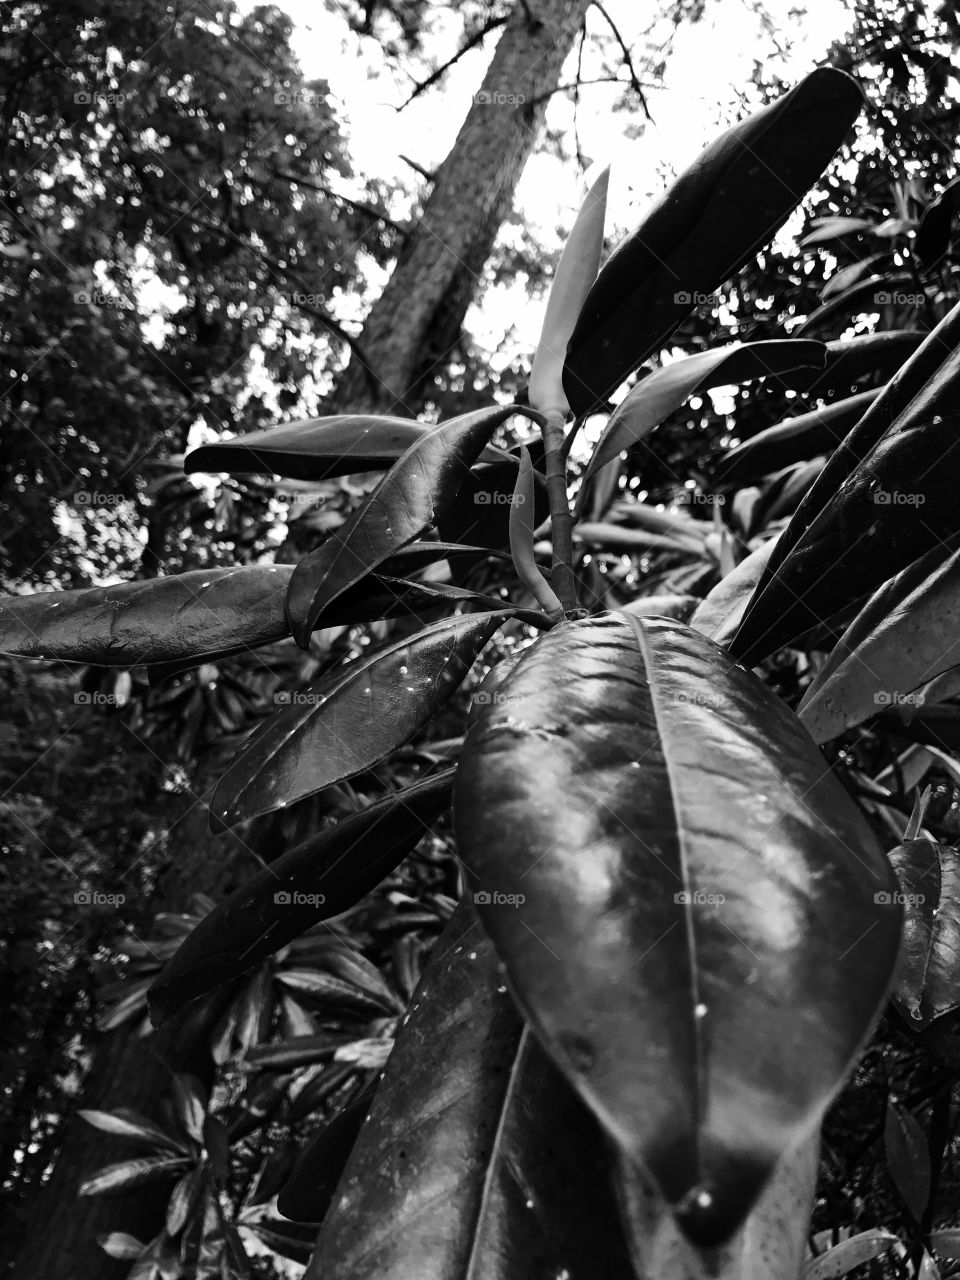 Nice Black n White shot of some thick leaves.